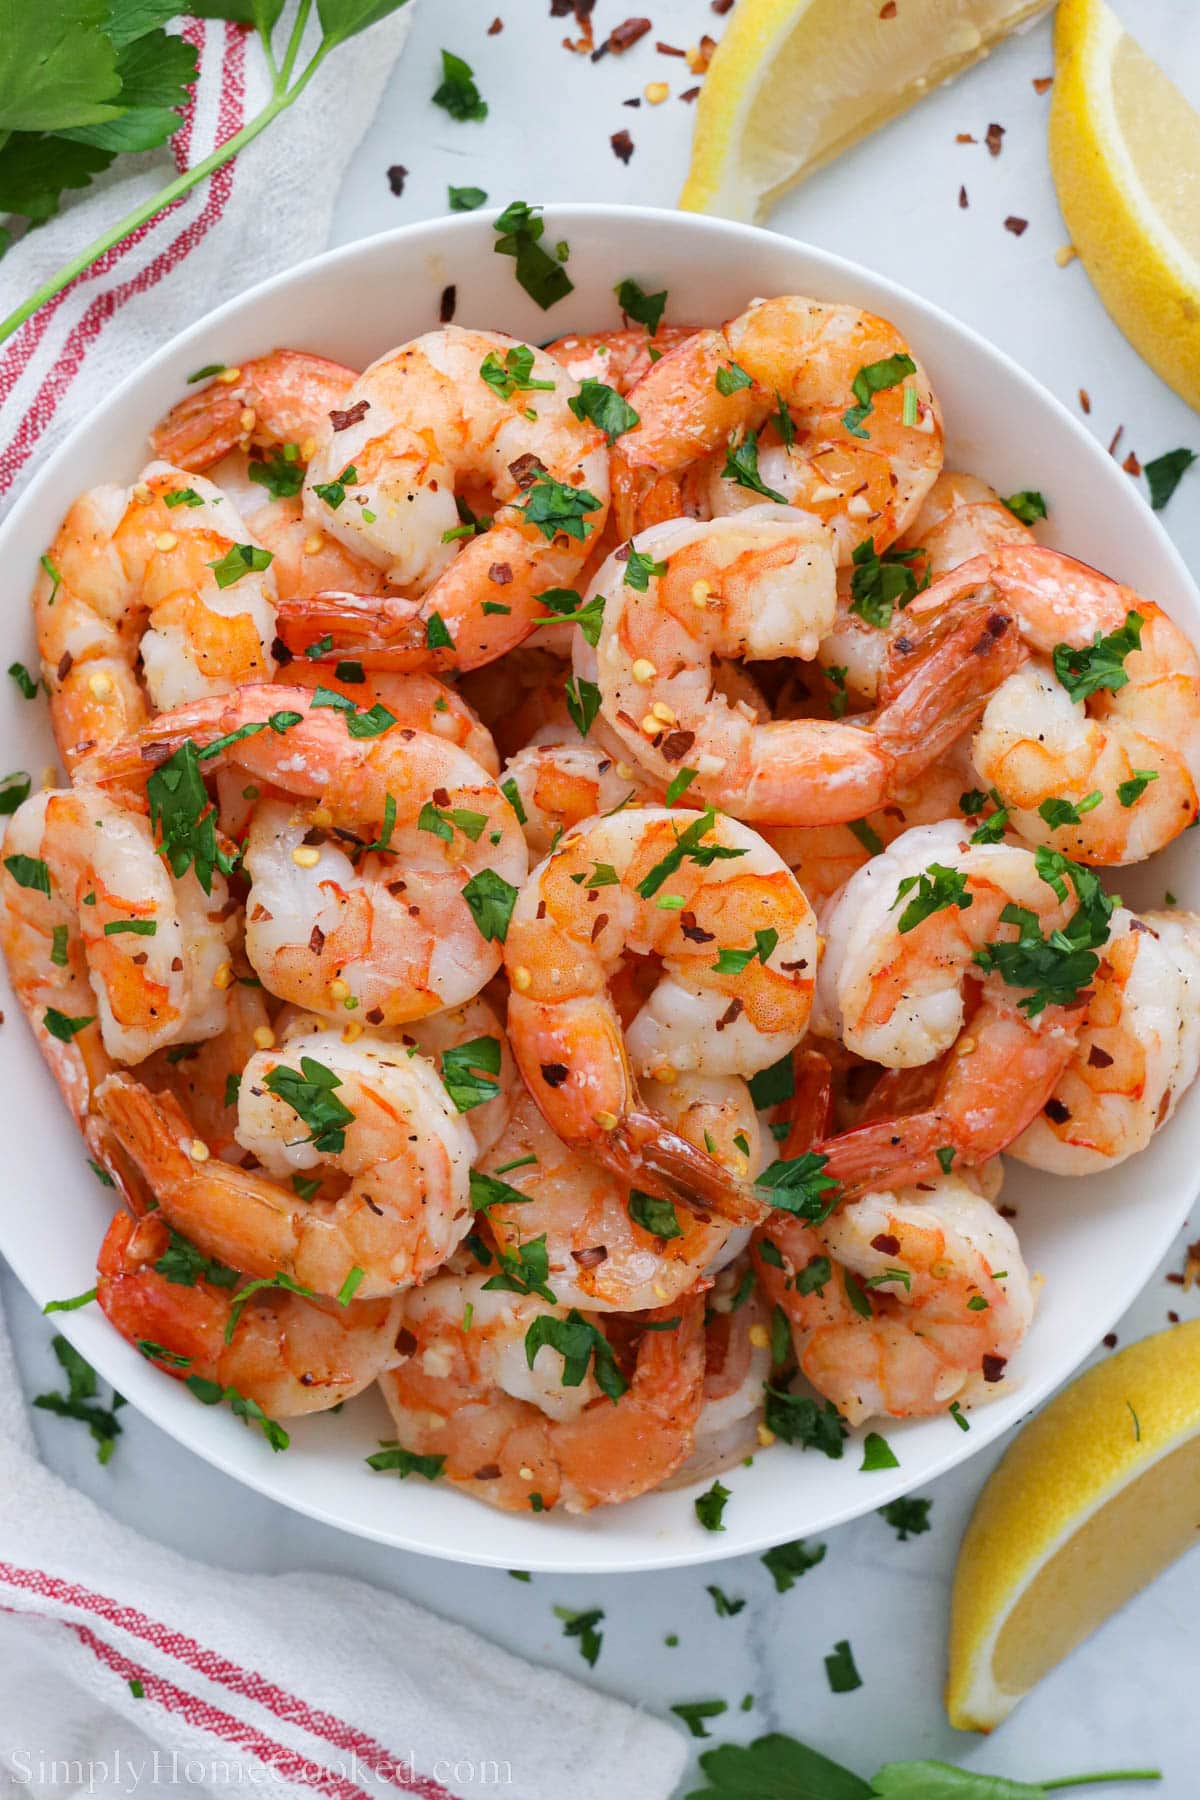 Plate of Baked Shrimp with lemon wedges and garnished with parsley.